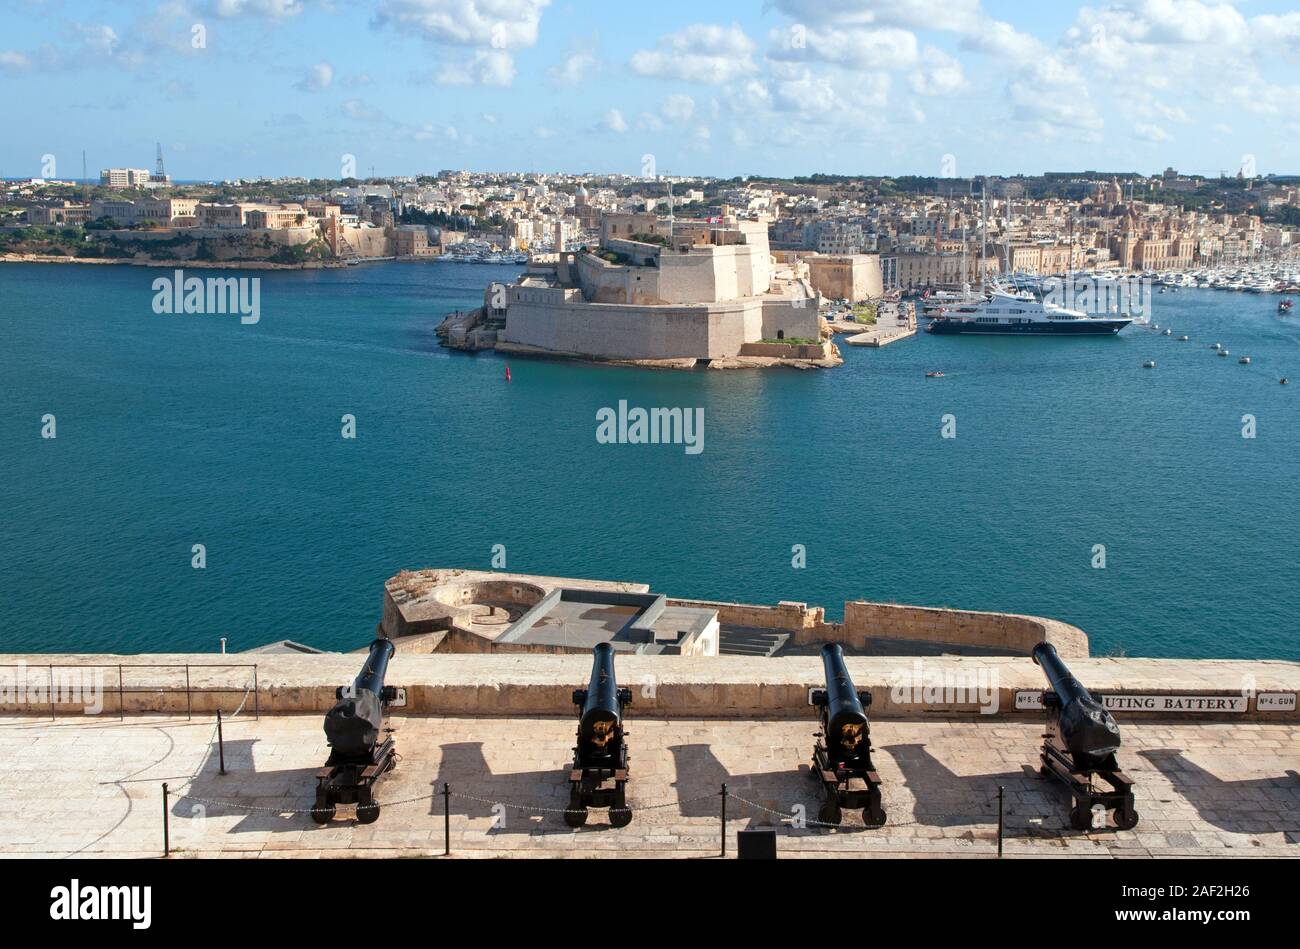 Cannons at the saluting battery, Upper Barracca Gardens, overlooking Valletta,s Grand Harbour Stock Photo